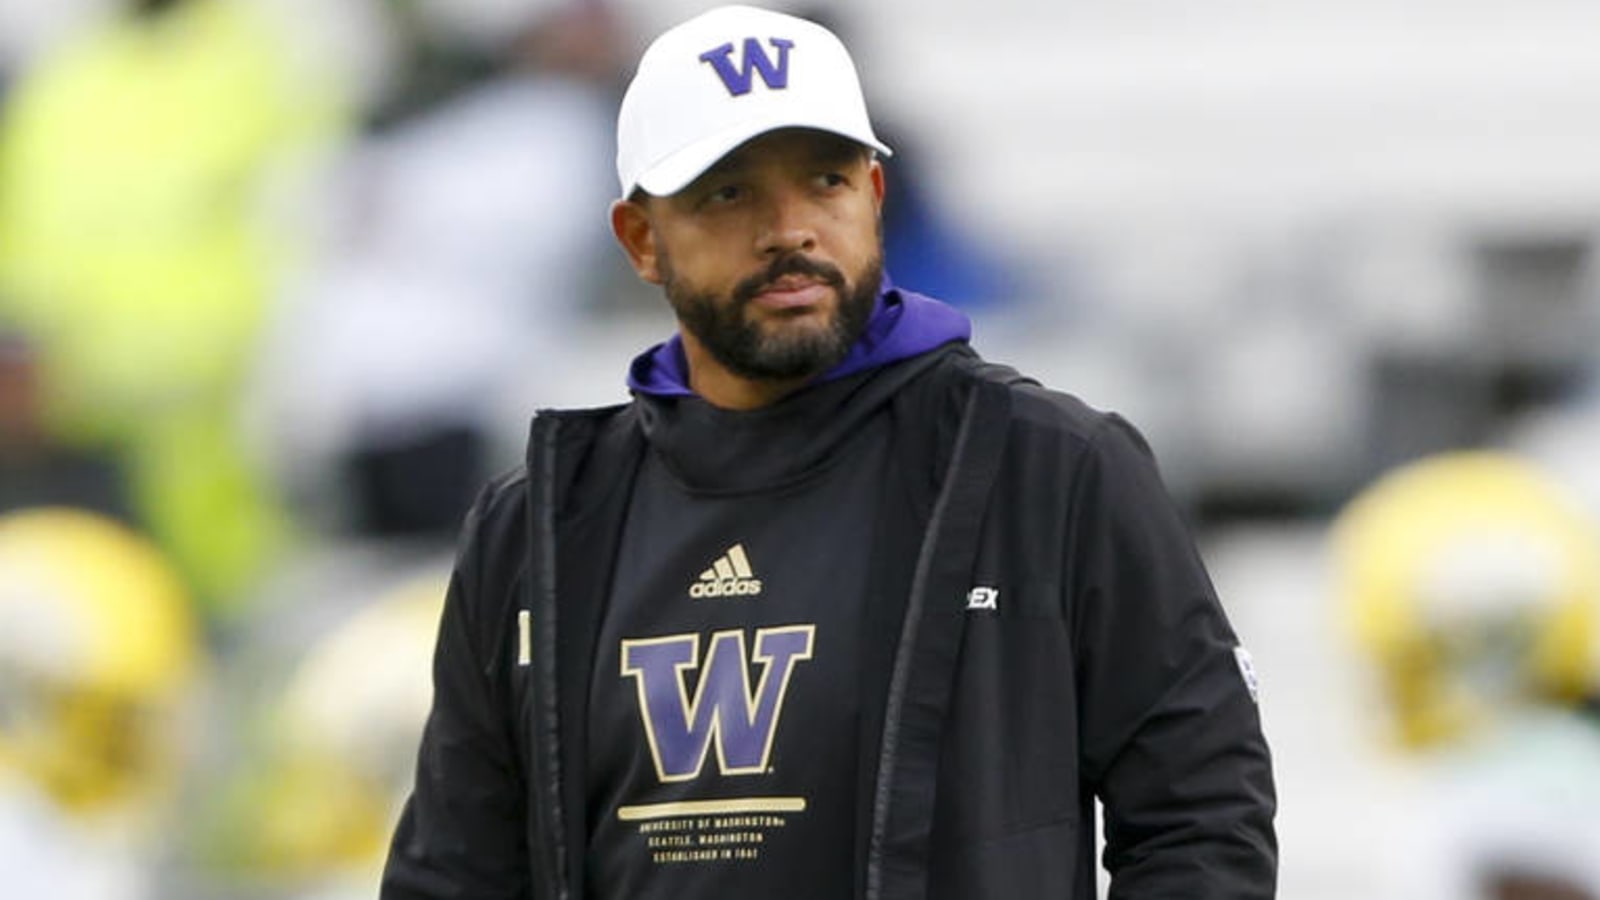 Washington suspends Lake one week for altercation with player